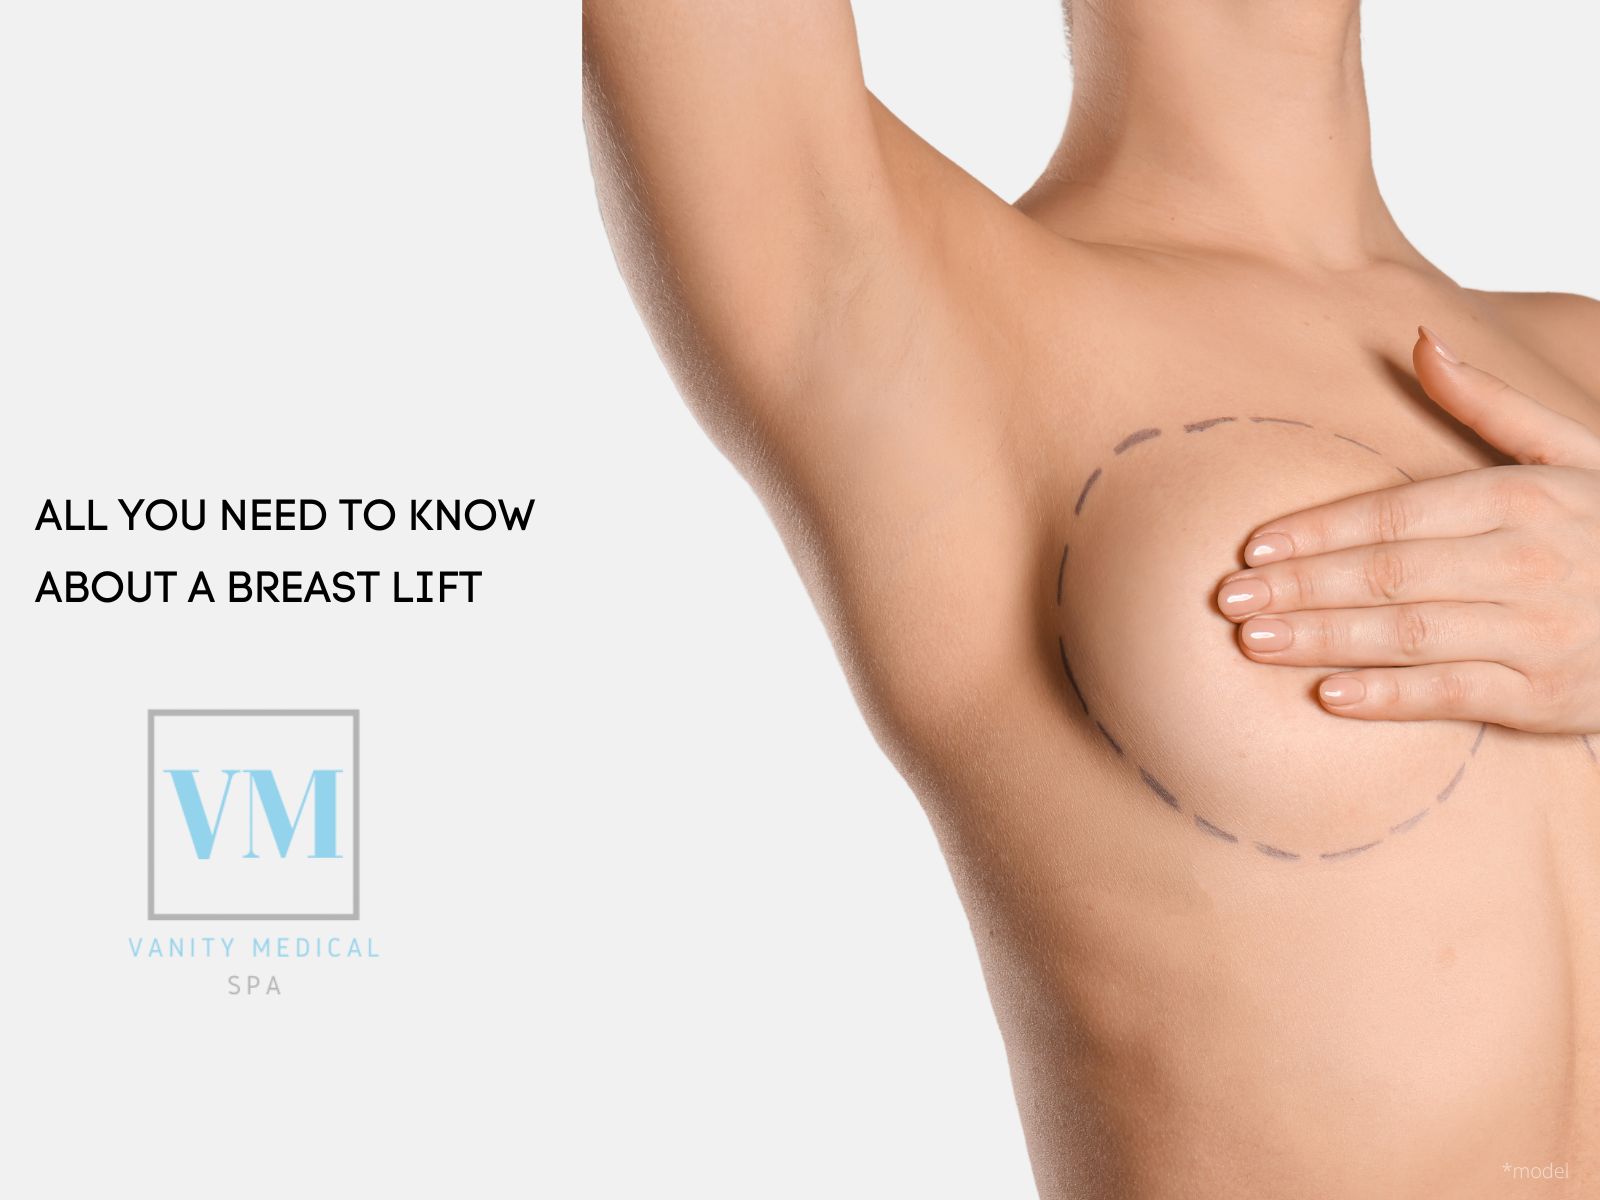 All You Need to Know About a Breast Lift